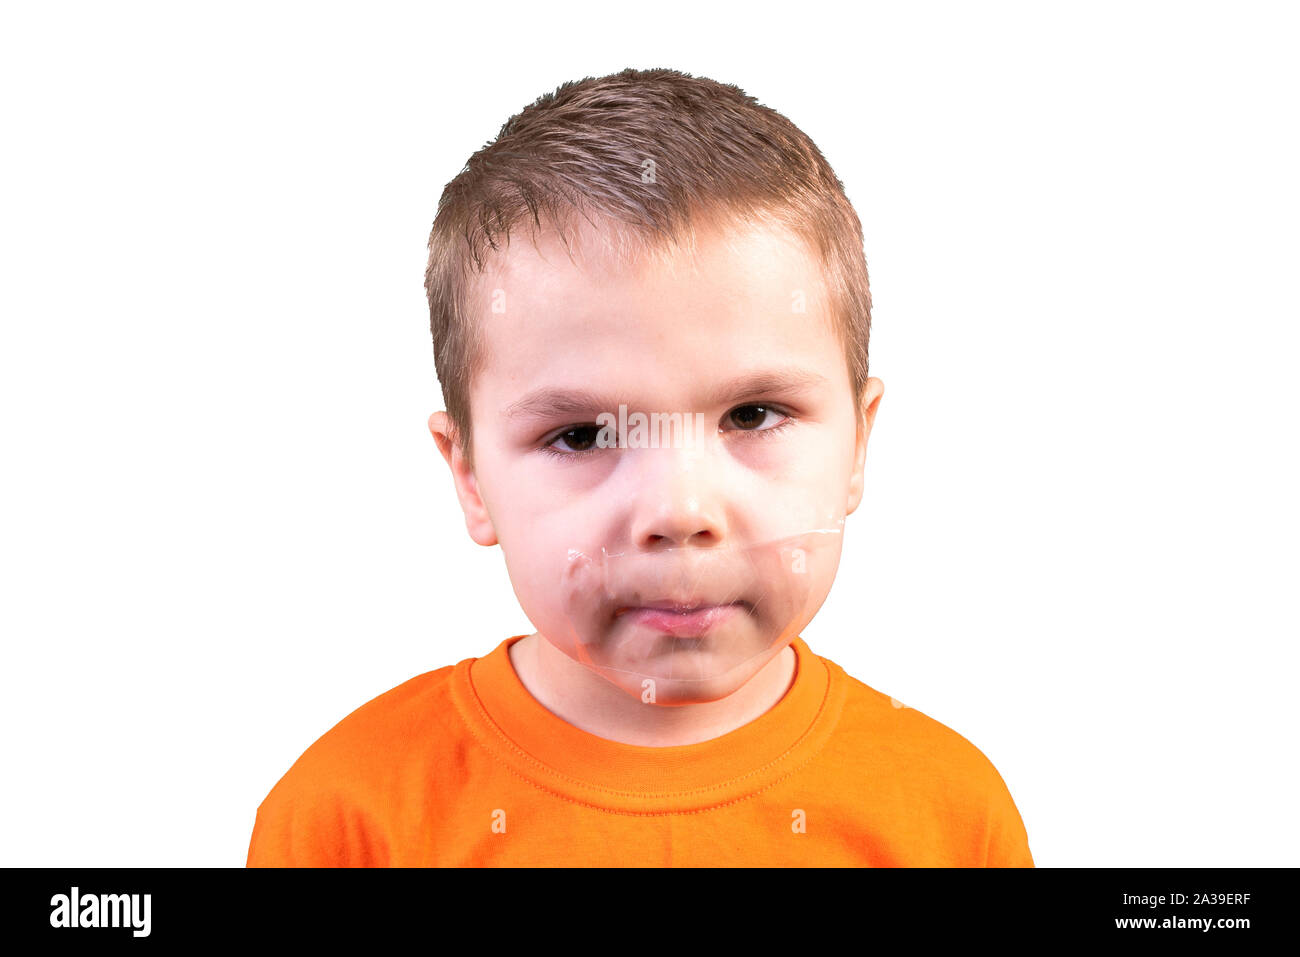 Boy with a closed mouth. Isolated on a white background. Stock Photo